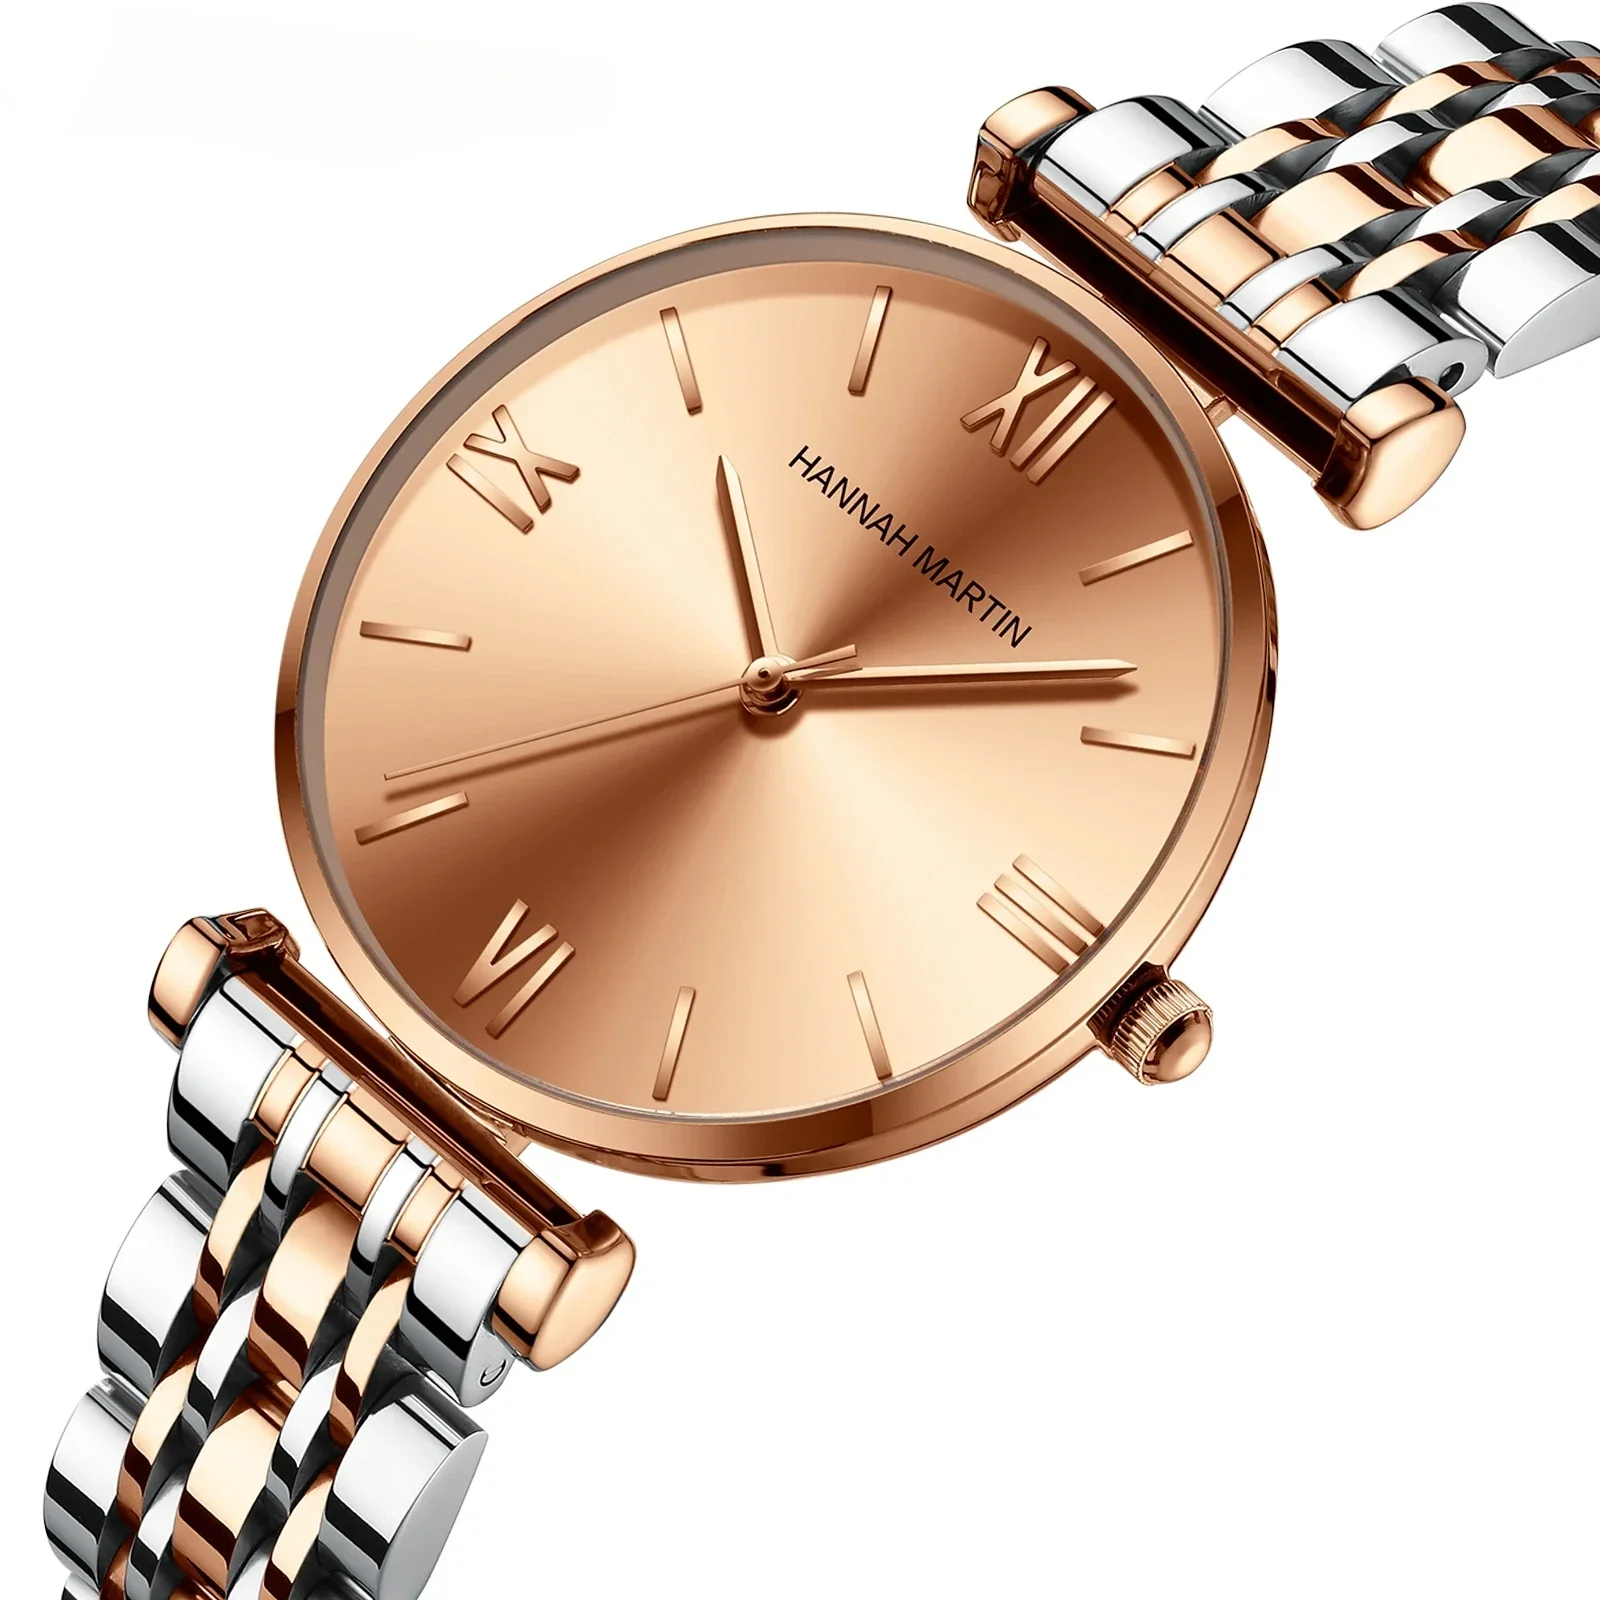 

2022 New Listing Ladies Luxury Watch High Quality Japan Imported 2035 Movement 36mm Dial Fashion Simple Quartz Womenwatch